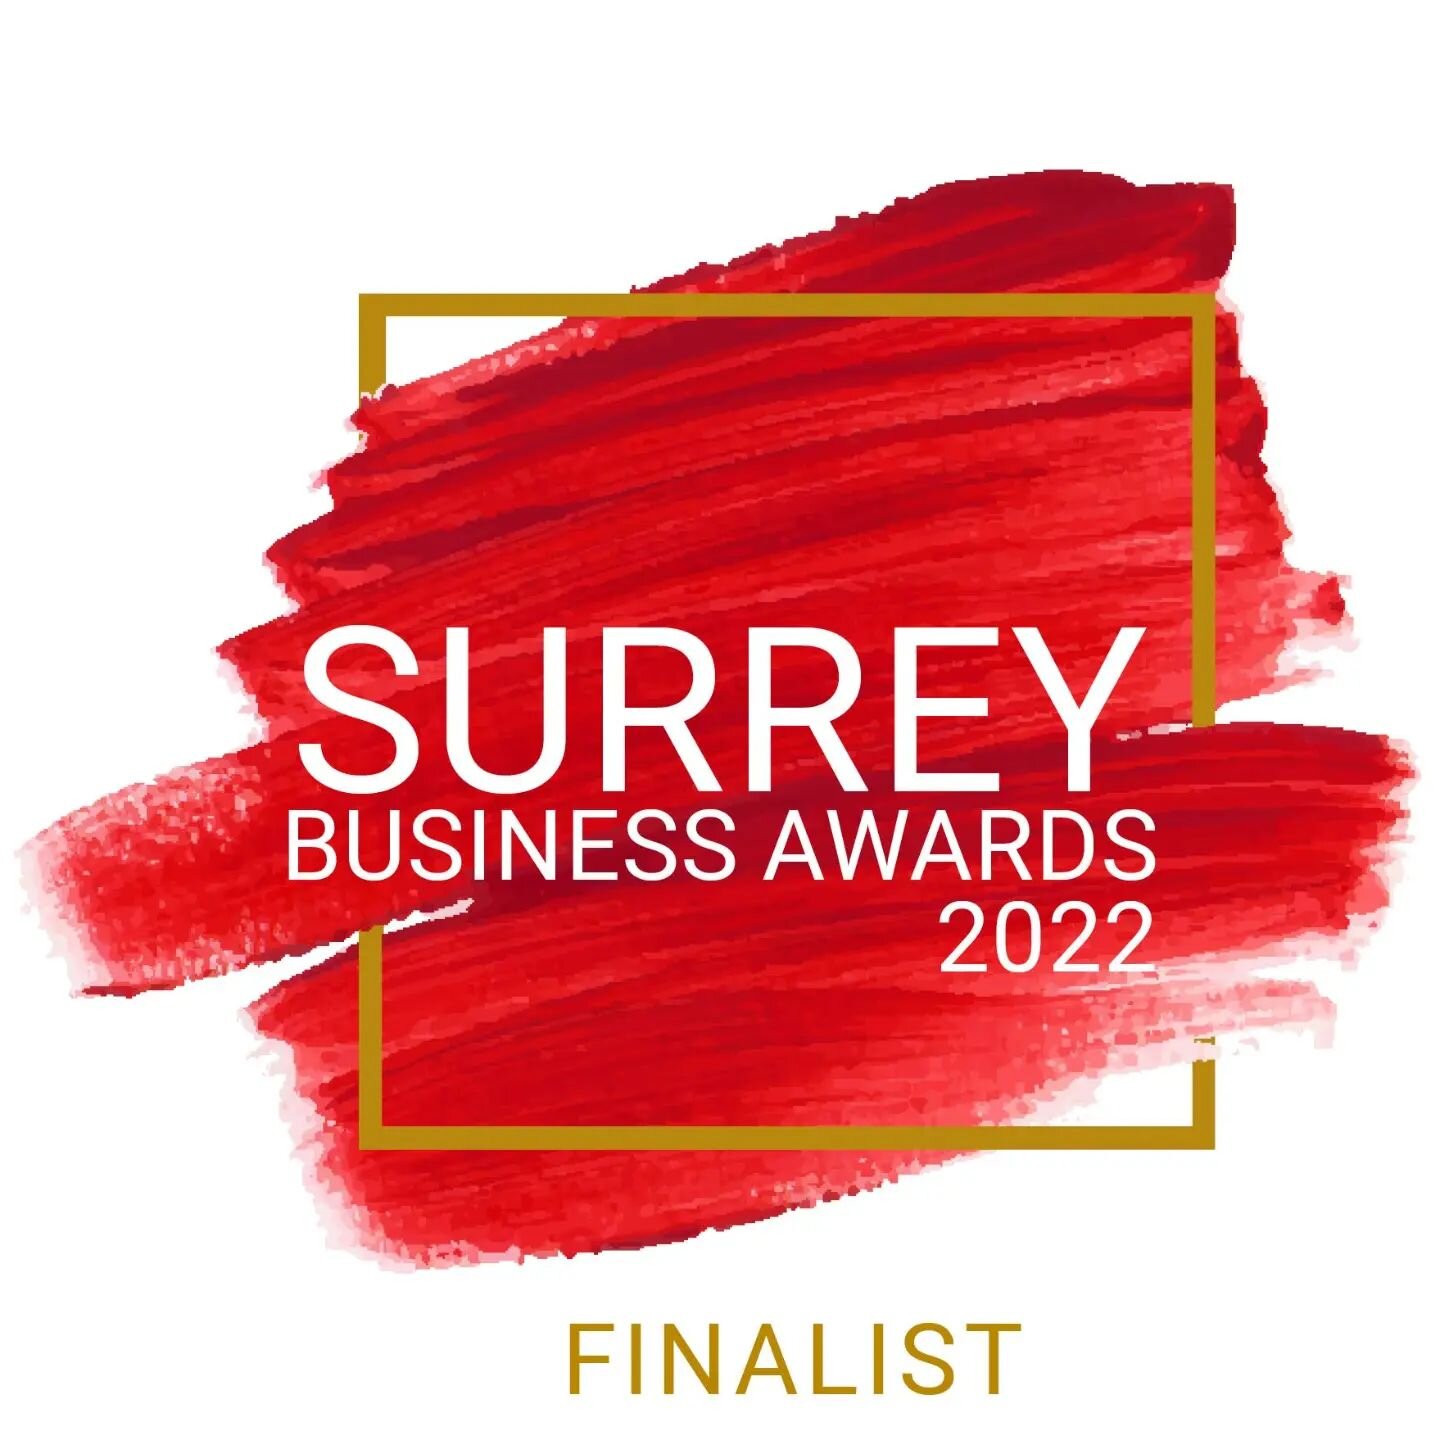 So happy to share that we have been shortlisted in two categories! Start-up and small business #surreybusinessawards. 

Looking forward to dusting off the tux on November 3rd and we'll be keeping everything crossed until then. Thank you to everyone t